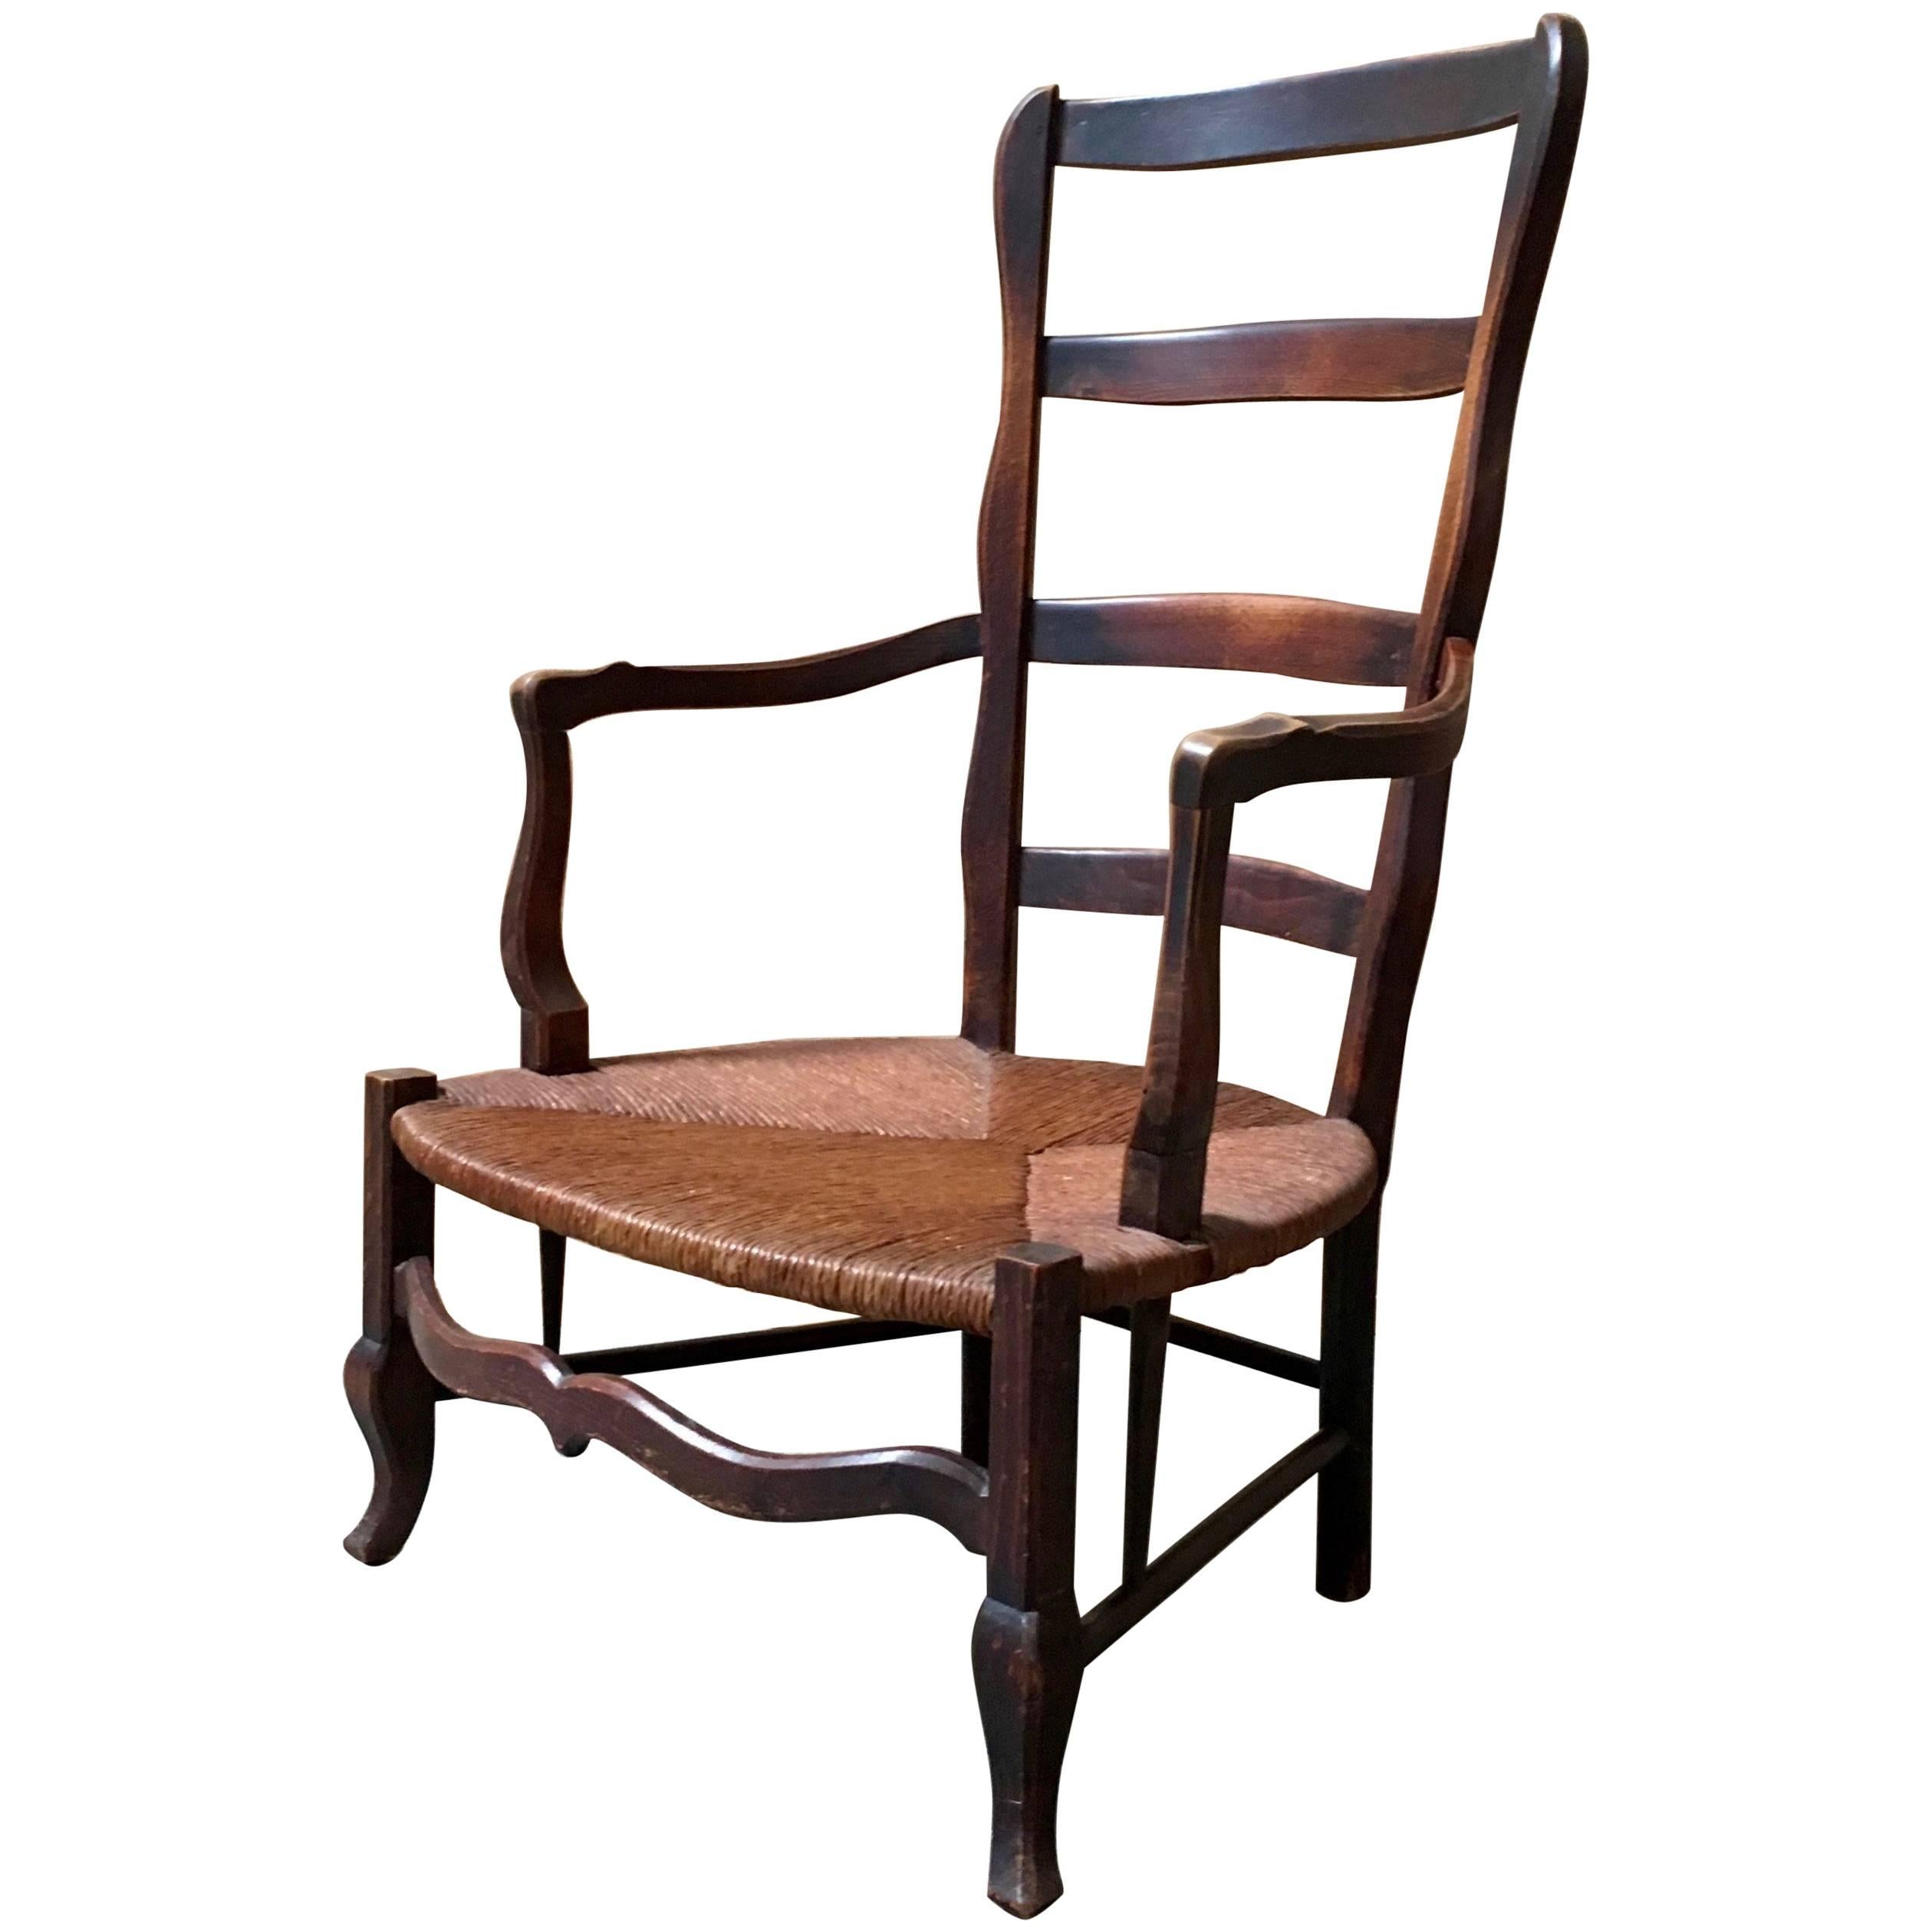 Rustic Country French Fireside Chair